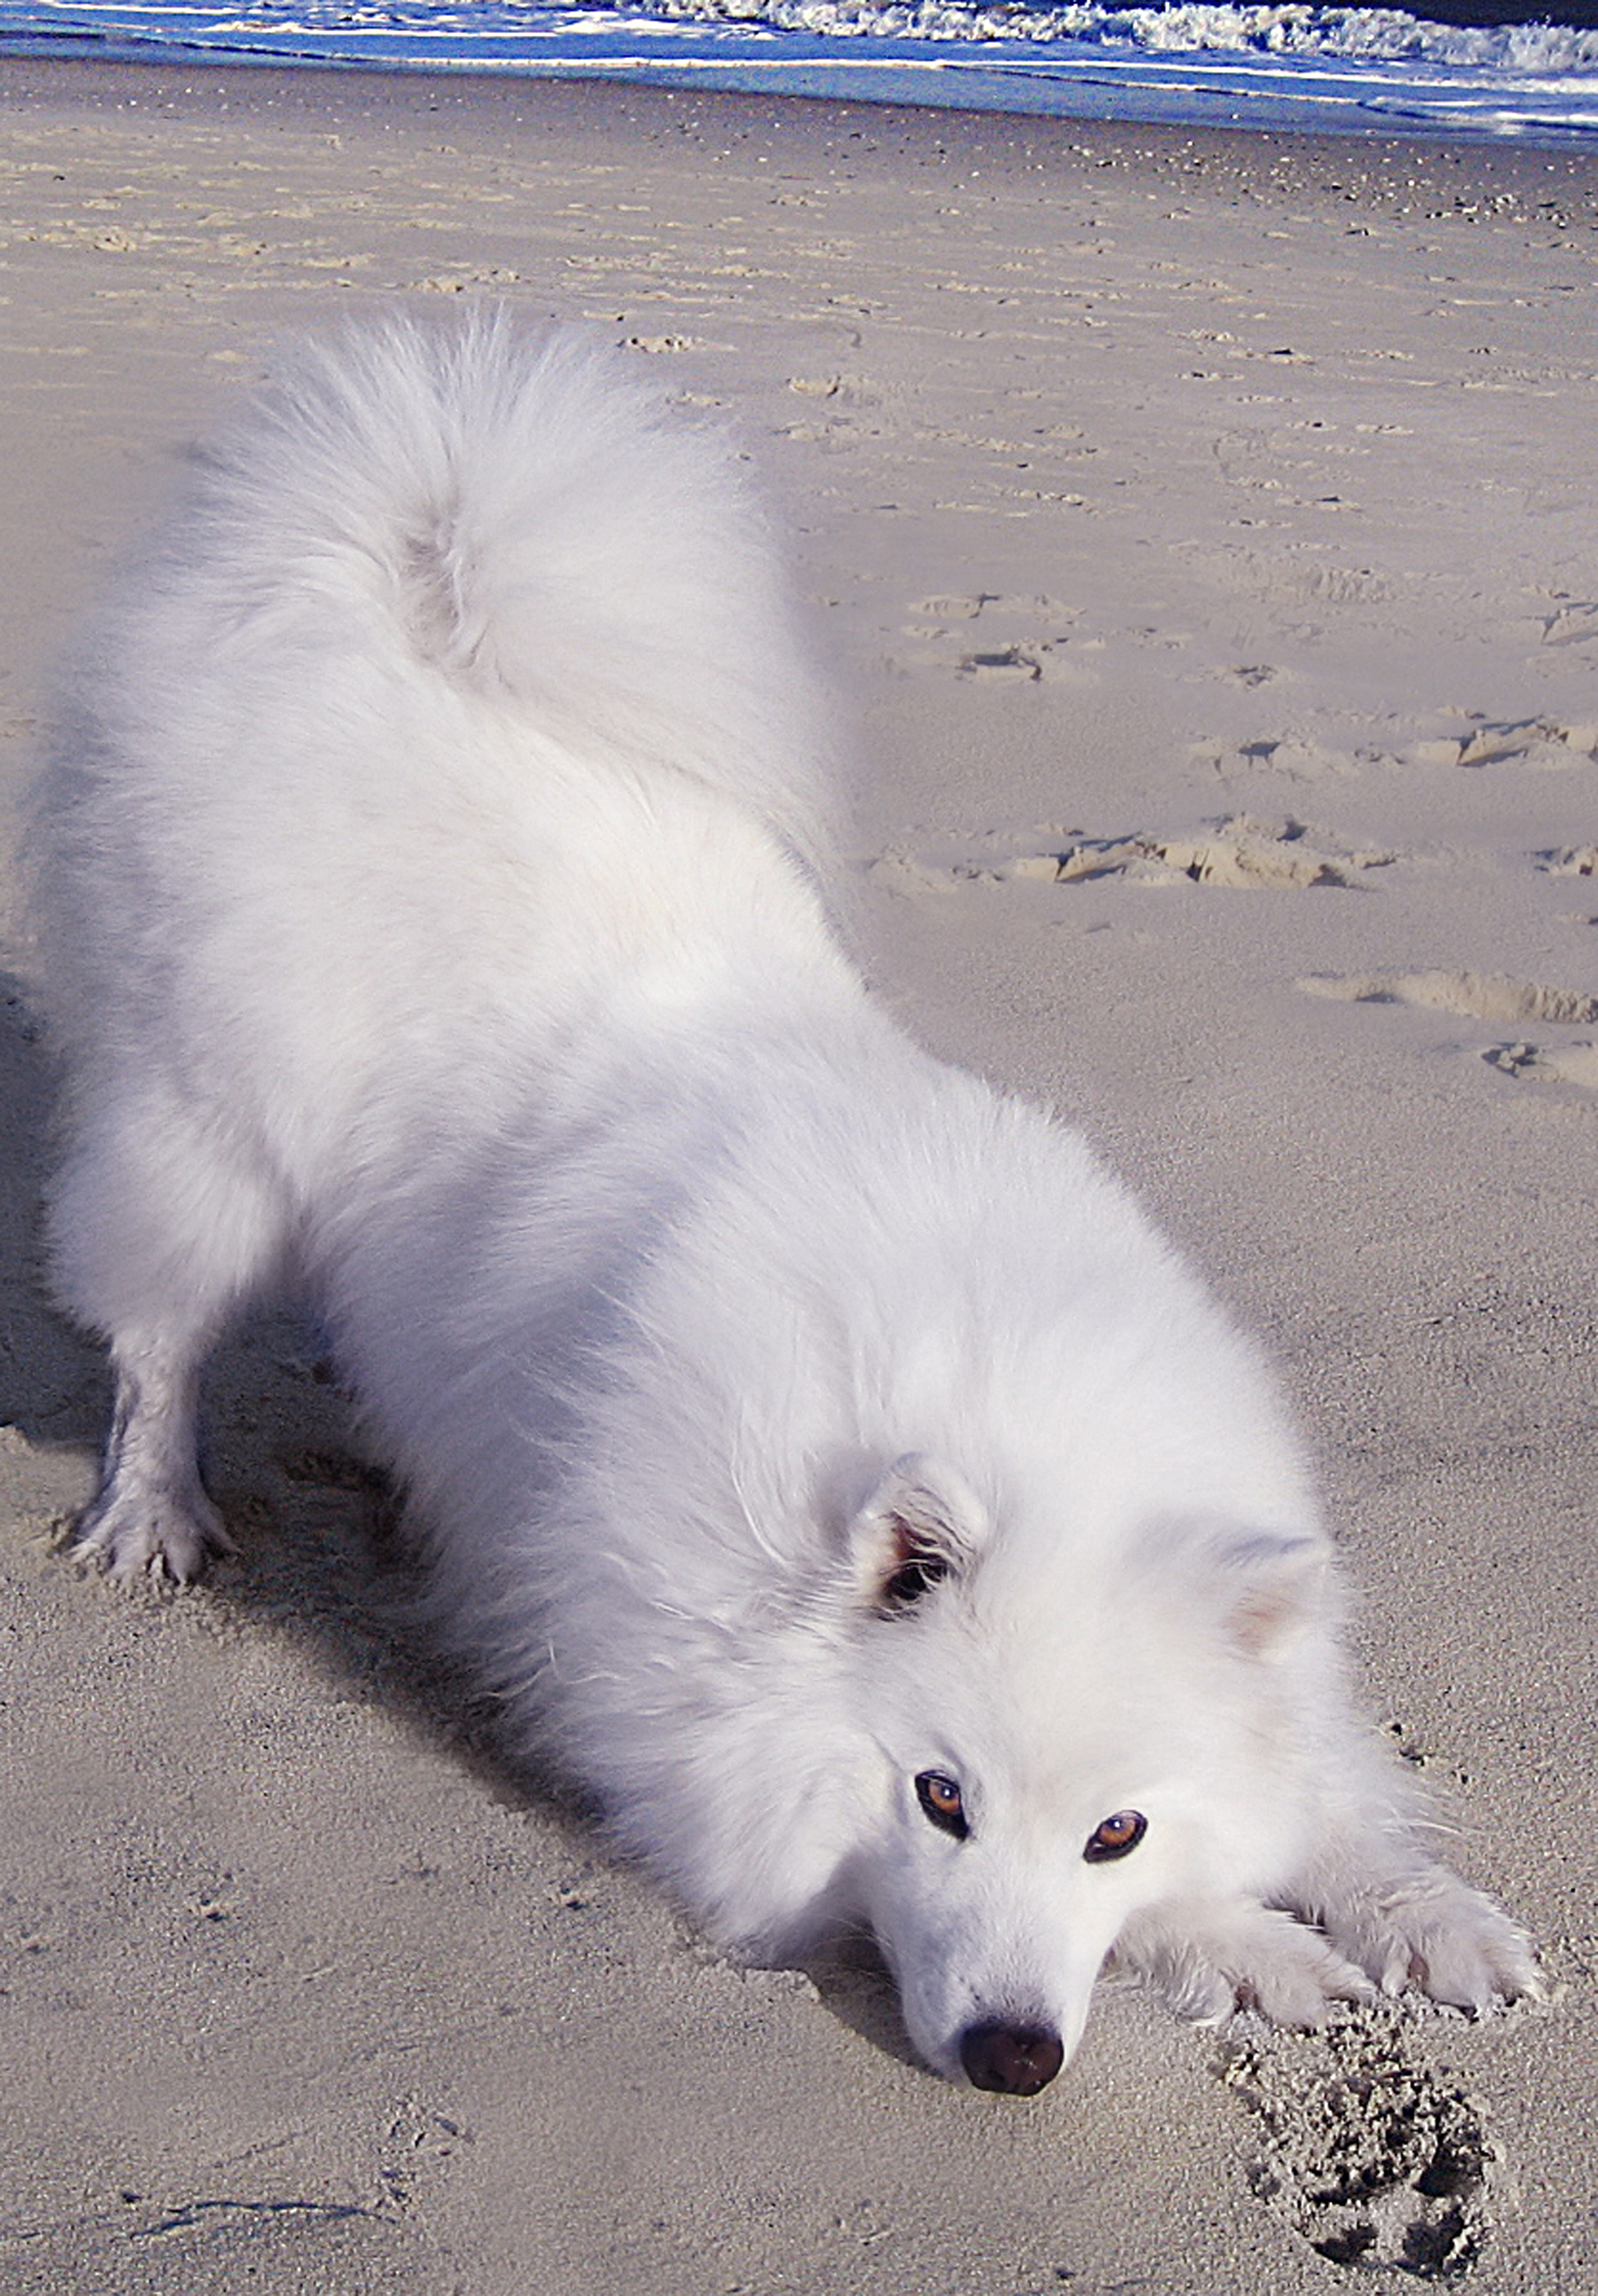 Official photo of Atka, the Amazing Eskie